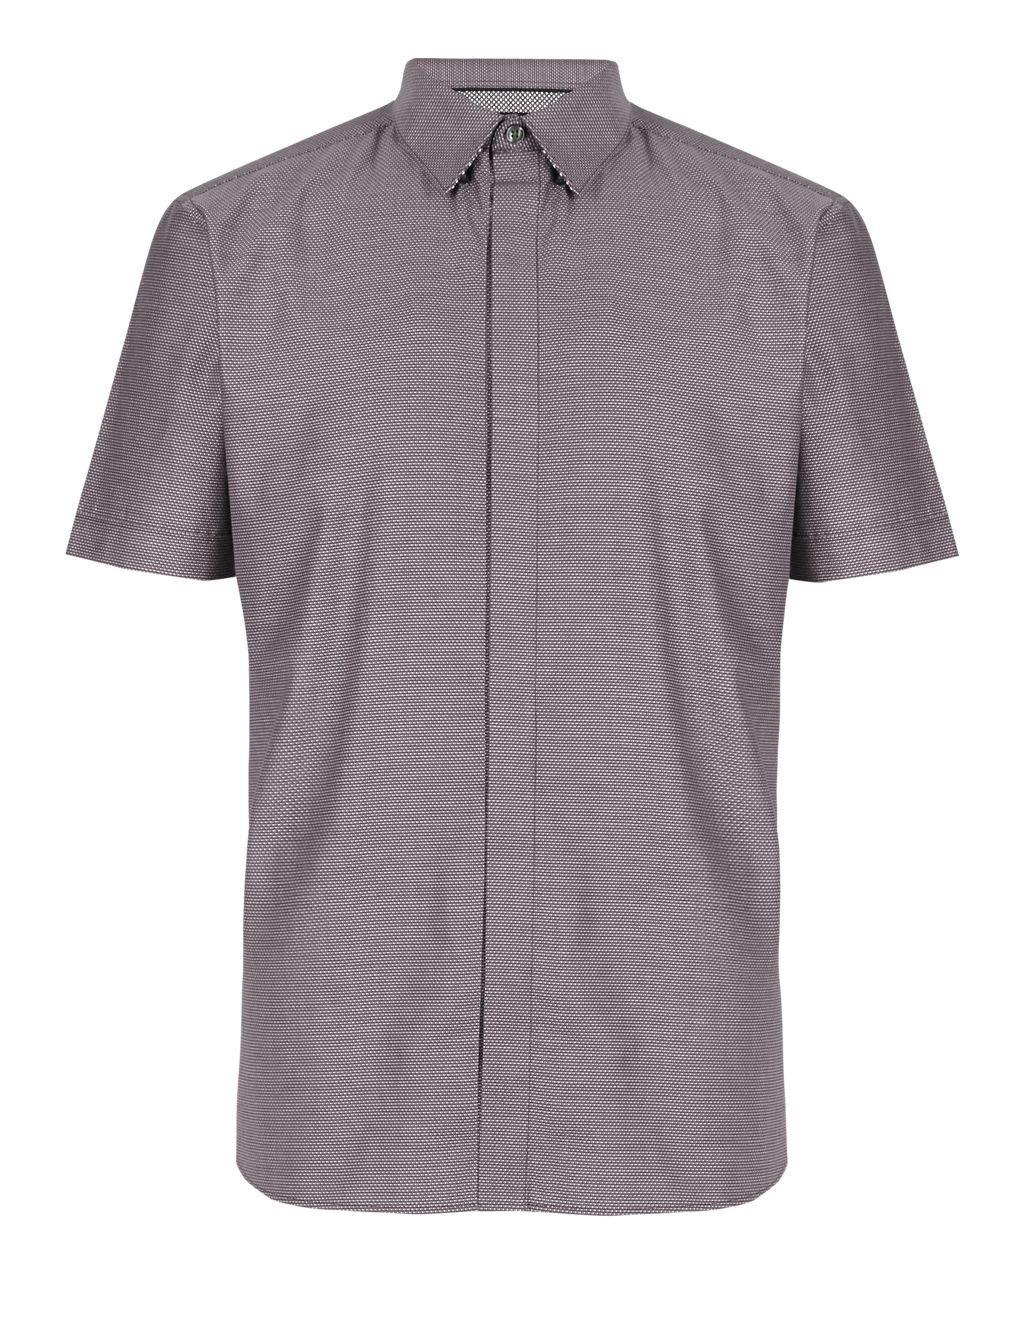 Supima® Cotton Tailored Fit Textured Shirt 1 of 3